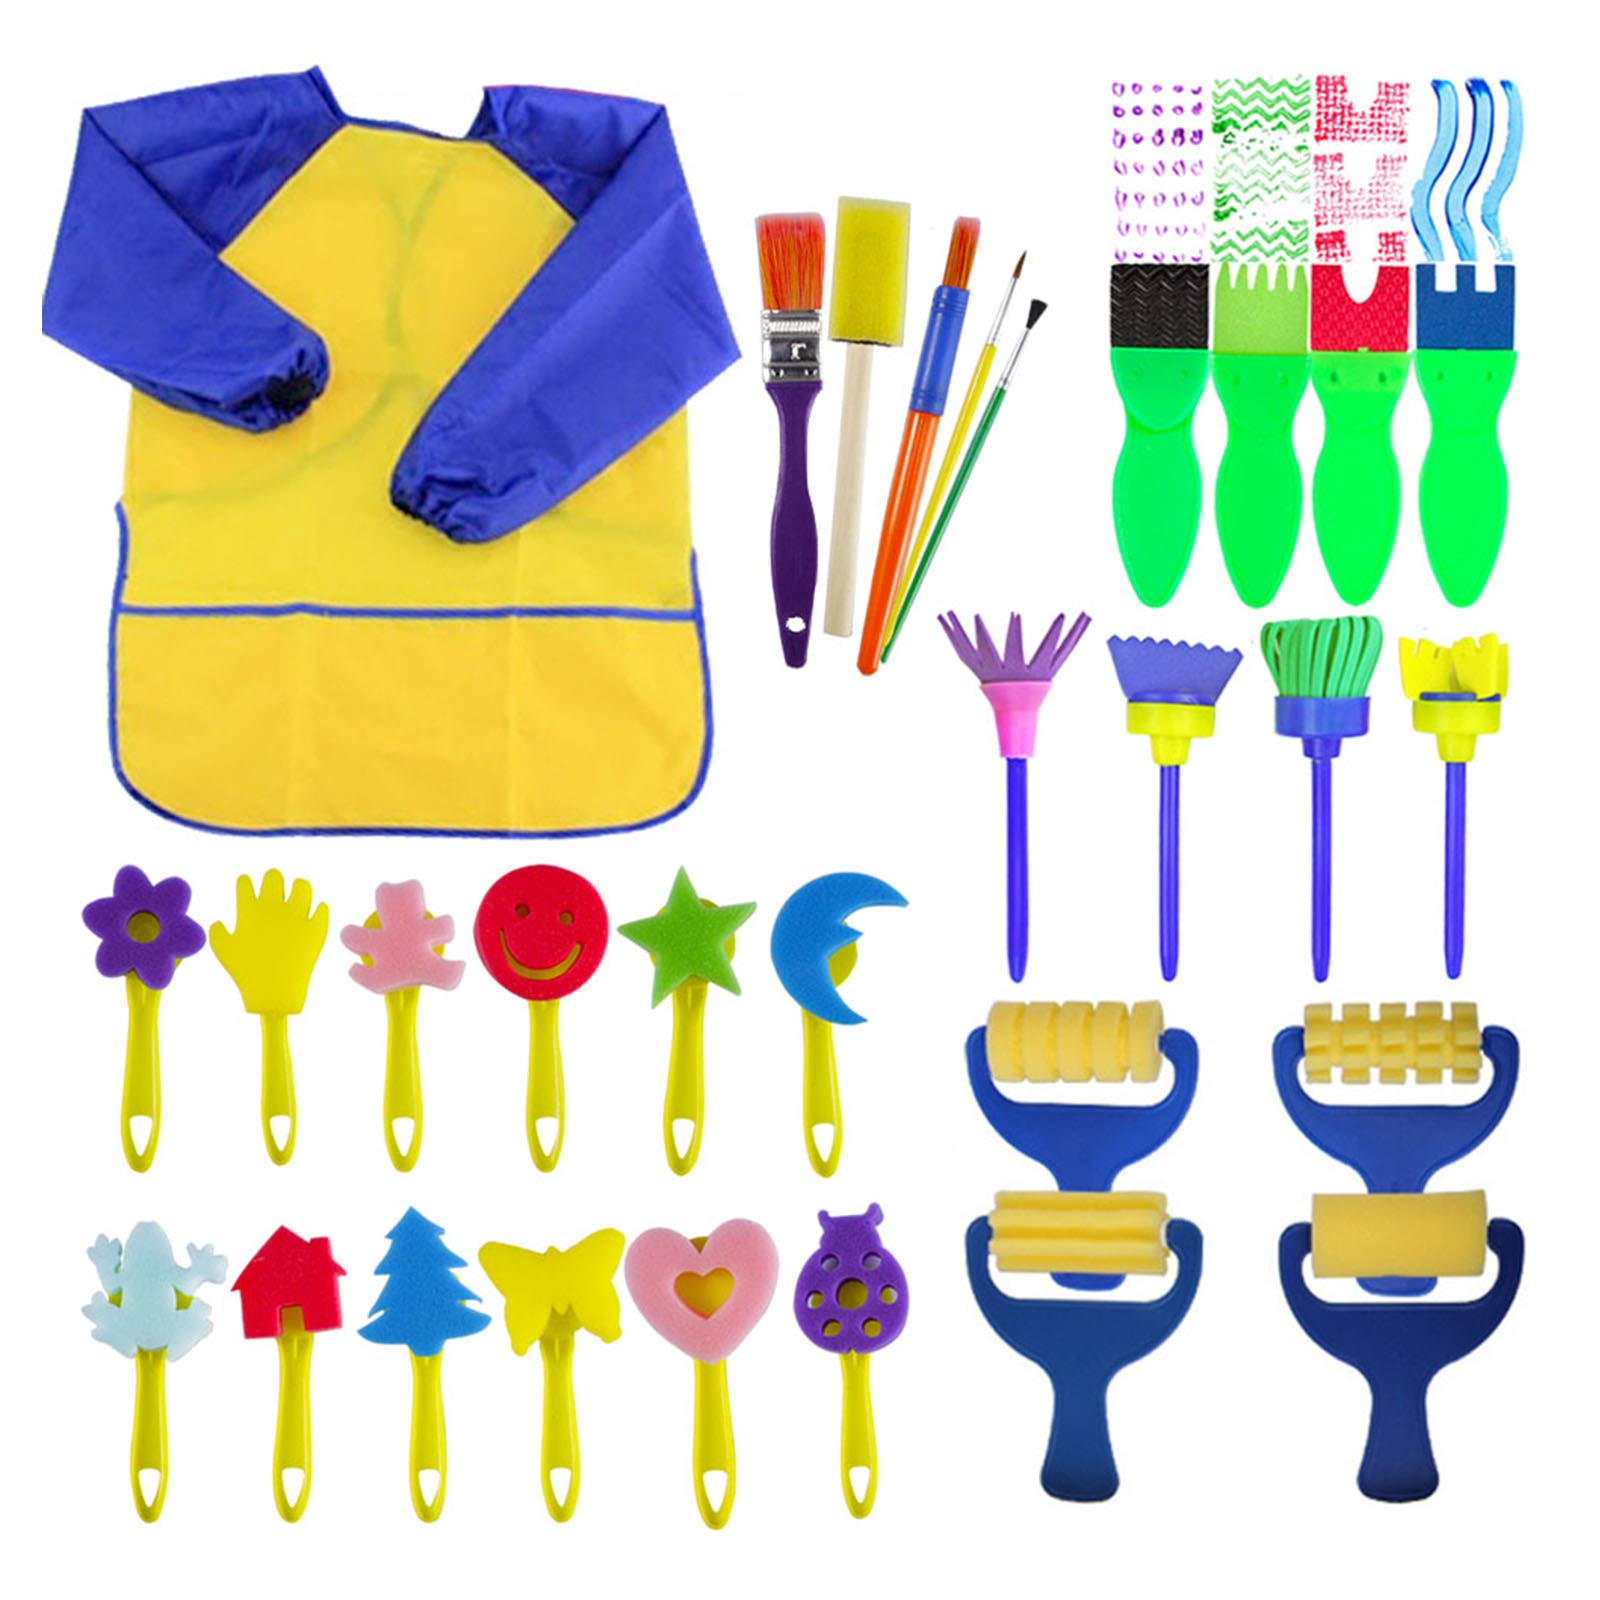 Book Cover EVNEED Paint Sponges for Kids,29 pcs of Fun Paint Brushes for Toddlers.Coming with Sponge Brush, Flower Pattern Brush, Brush Set, Long Sleeve Waterproof Apron with 3 Roomy Pockets